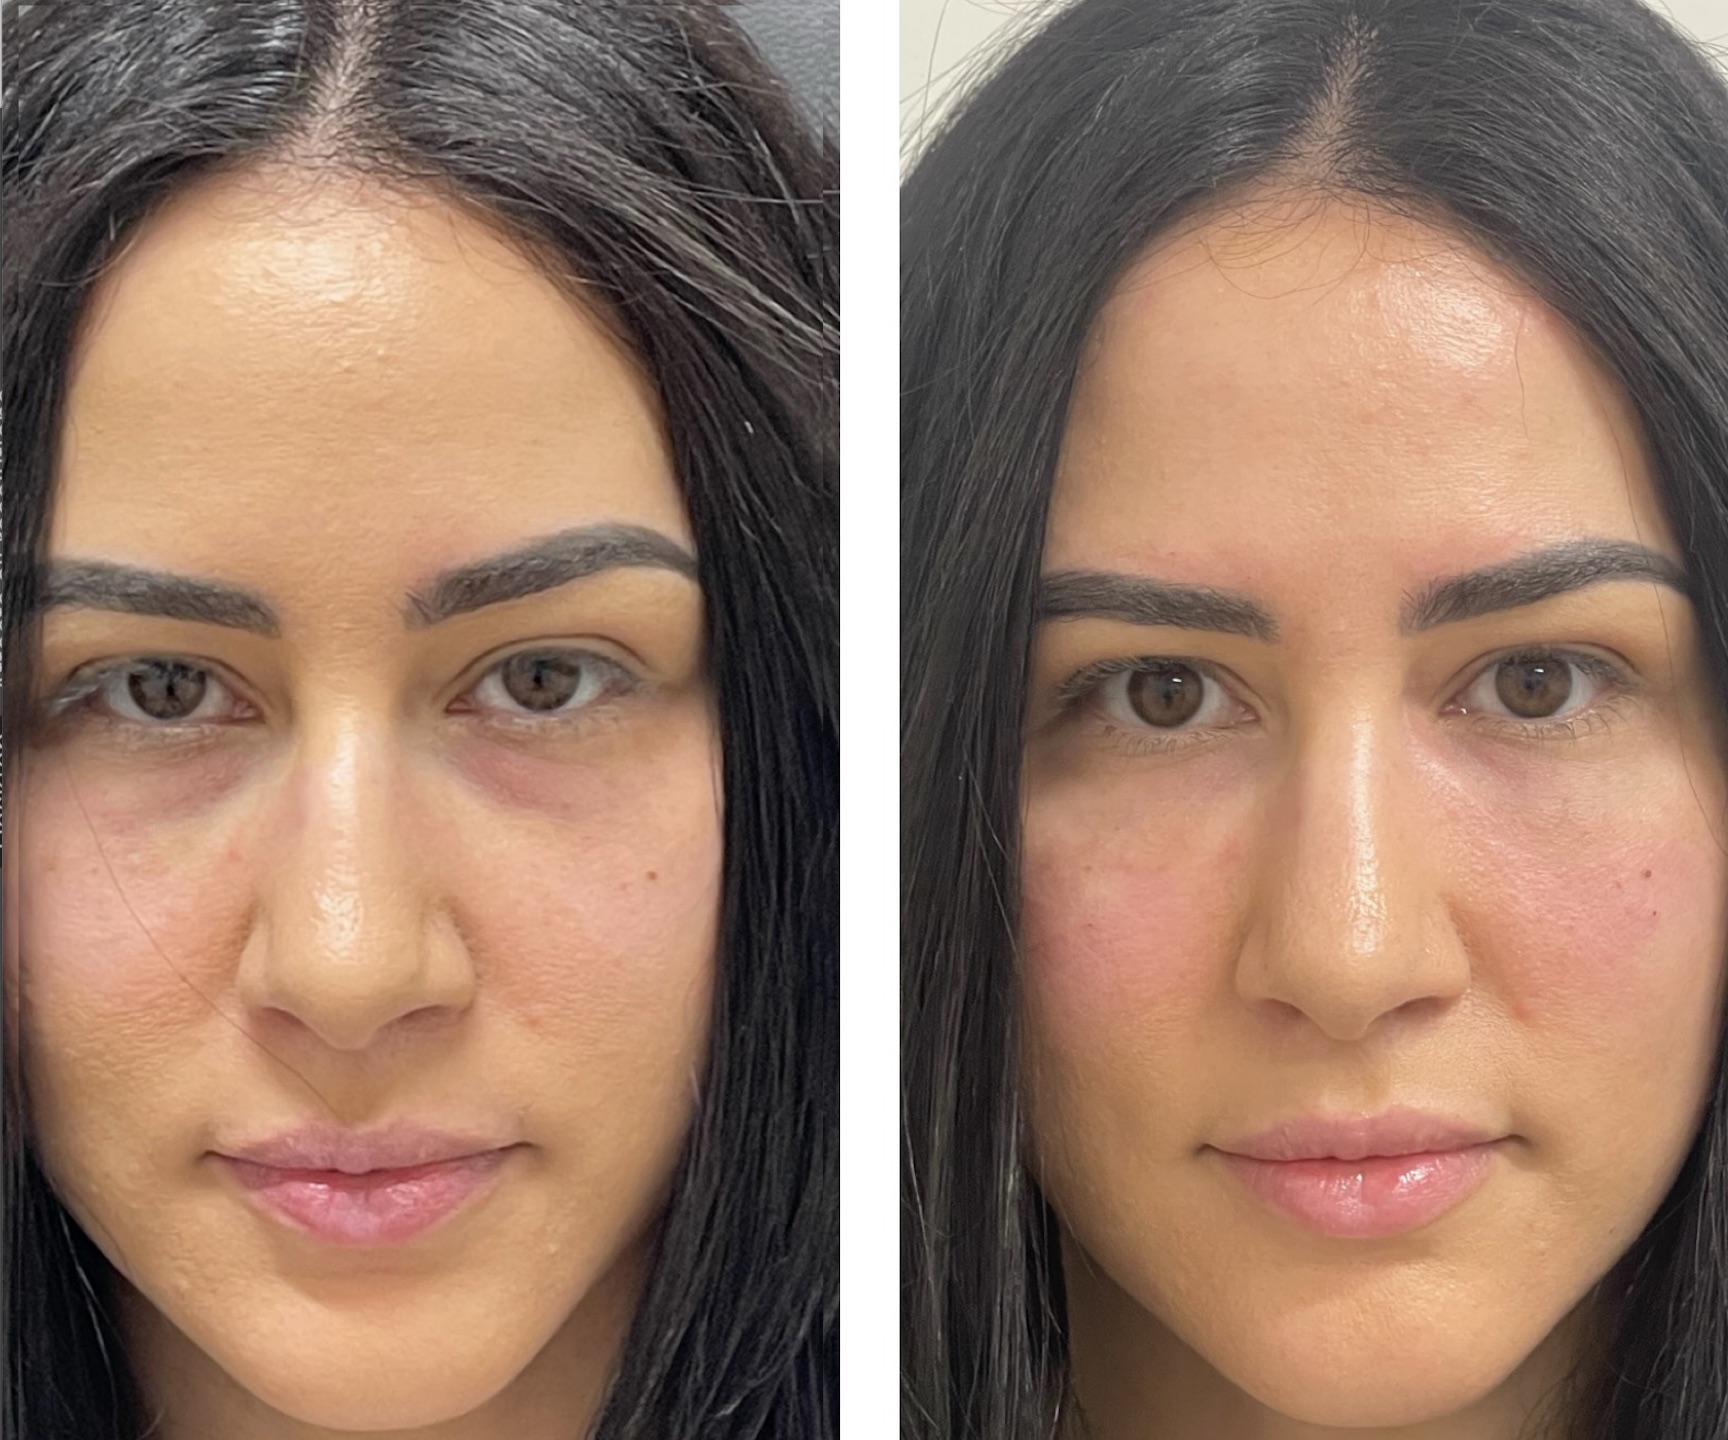 Before and After PRF Under Eye Tear Trough Injections from Erica Bedsted at Refyned Aesthetics Medical Spa in Fresno 